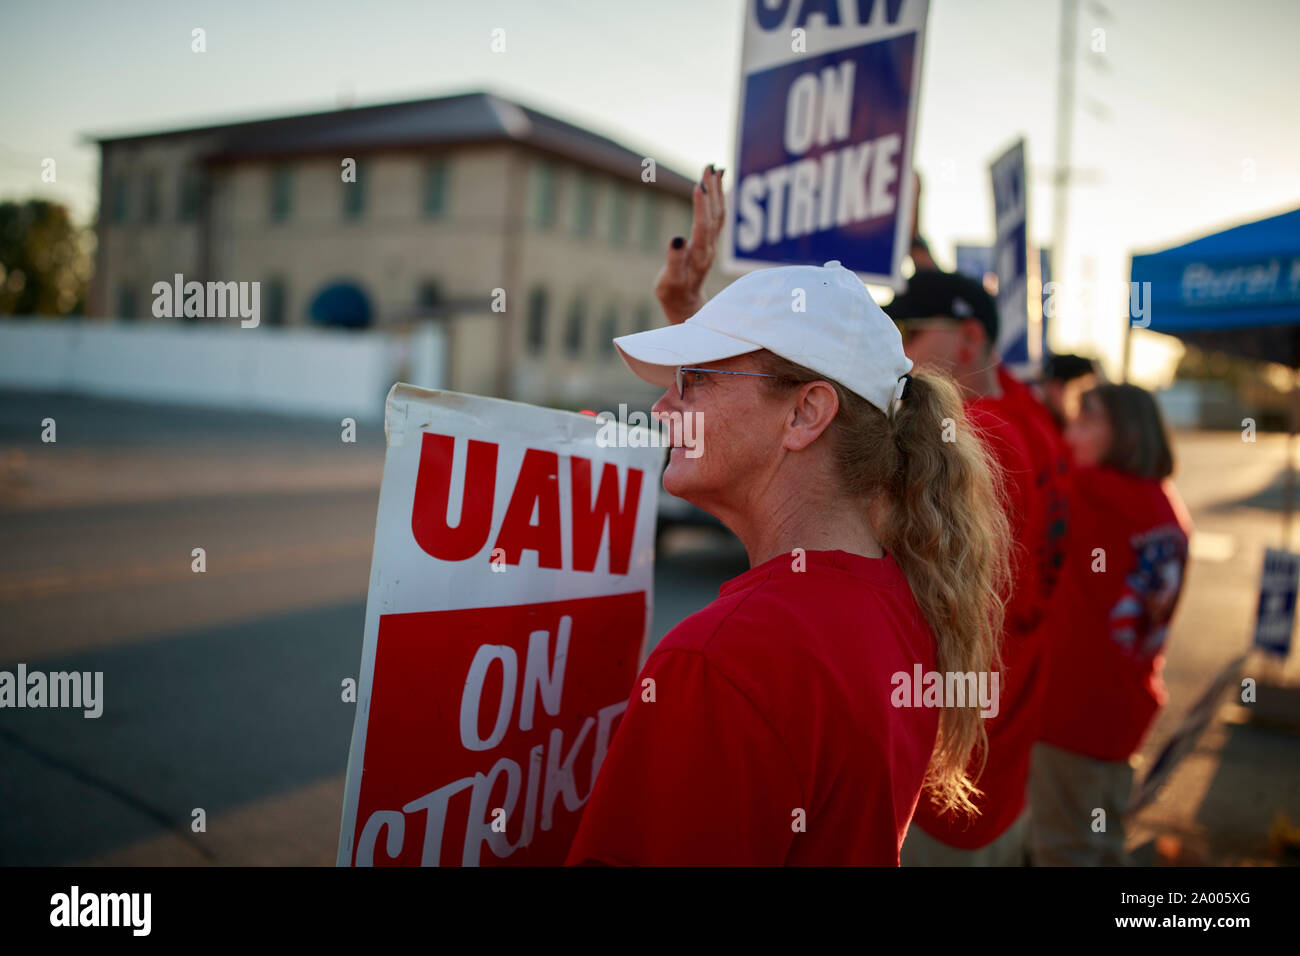 Workers from United Auto Workers Local 440 picket outside the General Motors Bedford Powertrain factory, where parts are molded from liquid metal, as the sun sets on day three of a nationwide worker strike against GM, Wednesday, September 18, 2019 in Bedford, Ind. The workers walked off the job at midnight on September 16th after their contract ran out, and are asking for better pay, affordable healthcare, that temp workers be made permanent, that jobs not be sent overseas, and that some factories, like the one in Lordtown, Ohio, be reopened. More than 700 workers at the Bedford, Indiana, fact Stock Photo